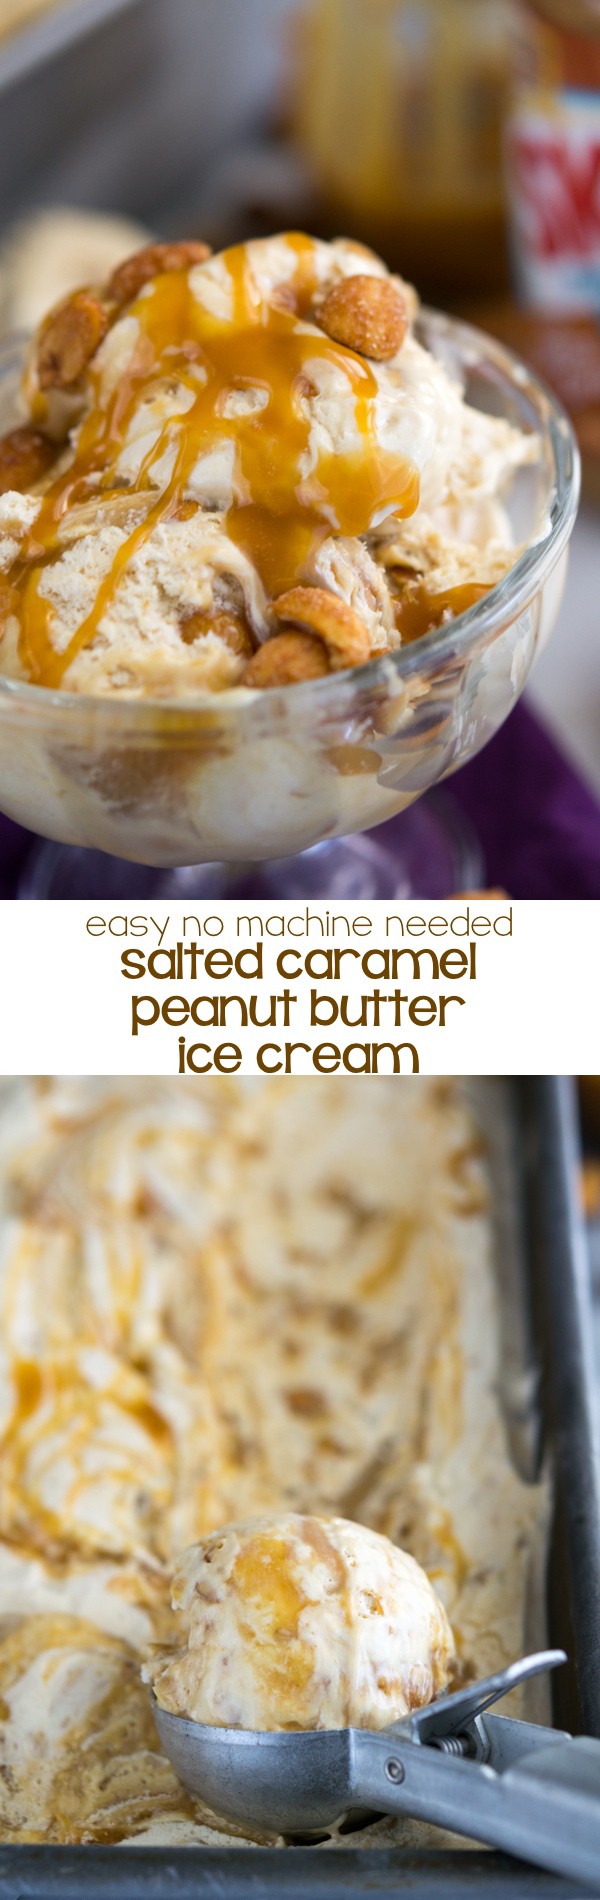 This Easy Salted Caramel Peanut Butter Ice Cream is made without an ice cream machine! It's no churn ice cream that tastes like salted caramel peanut butter!